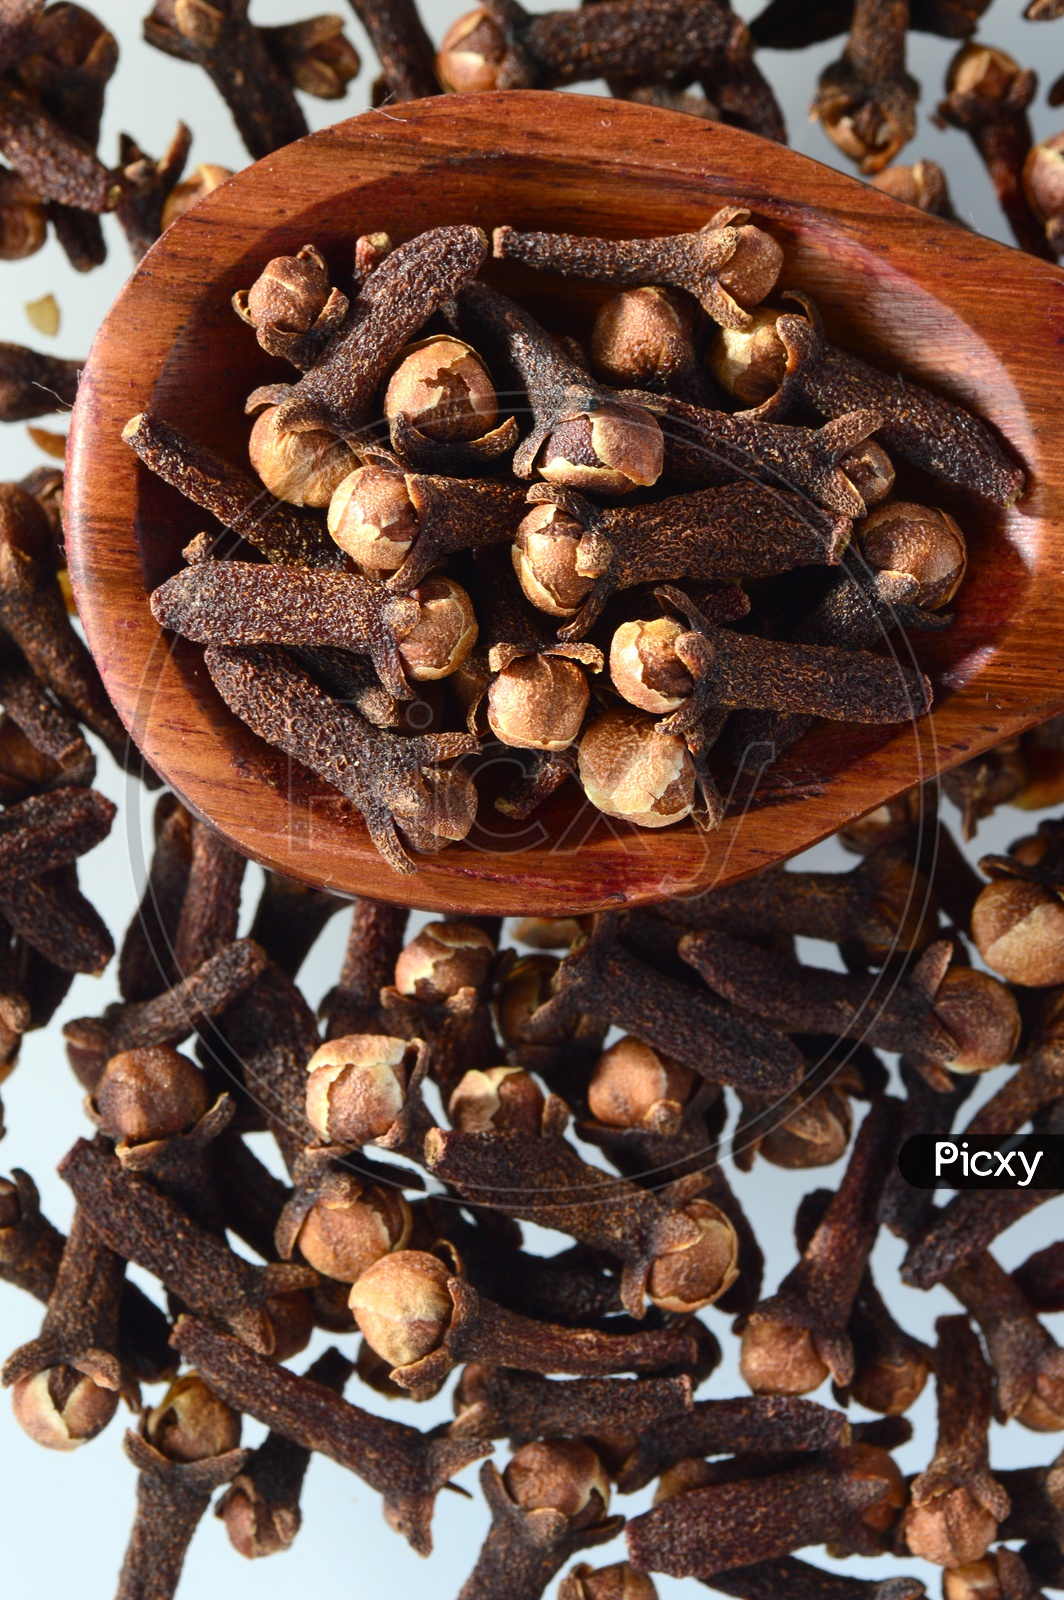 Cloves Or Indian Spice Cloves Composition Shot With Wooden Spoon On An Isolated White Background